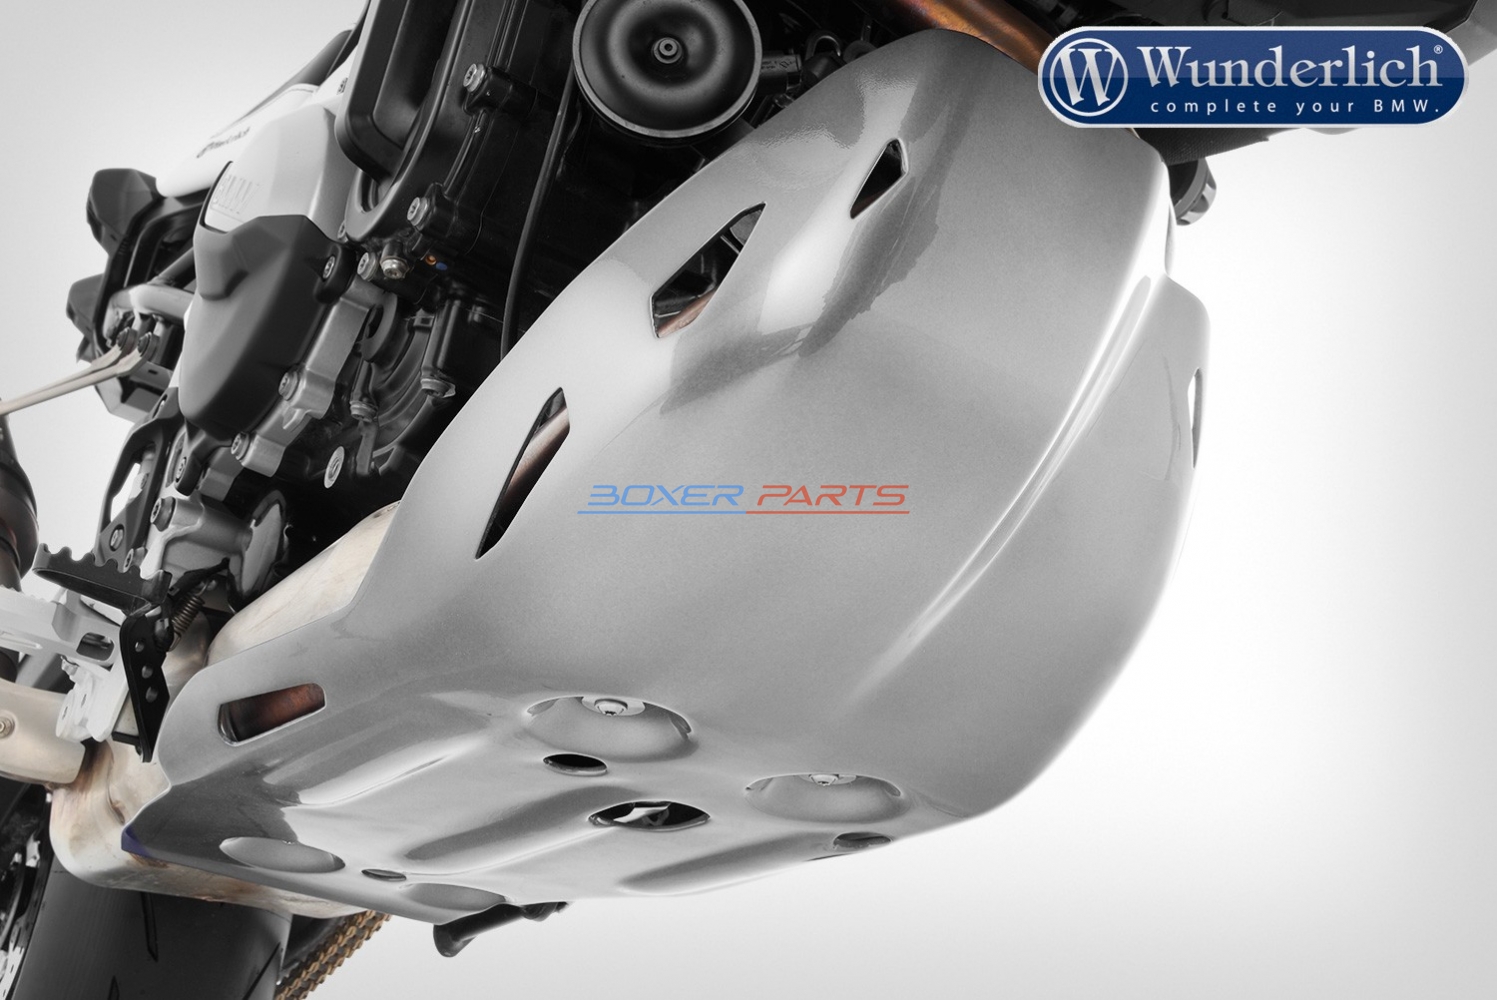 engine coverWunderlich EXTREME F850GS F750GS for BMW engine plate 26840-301